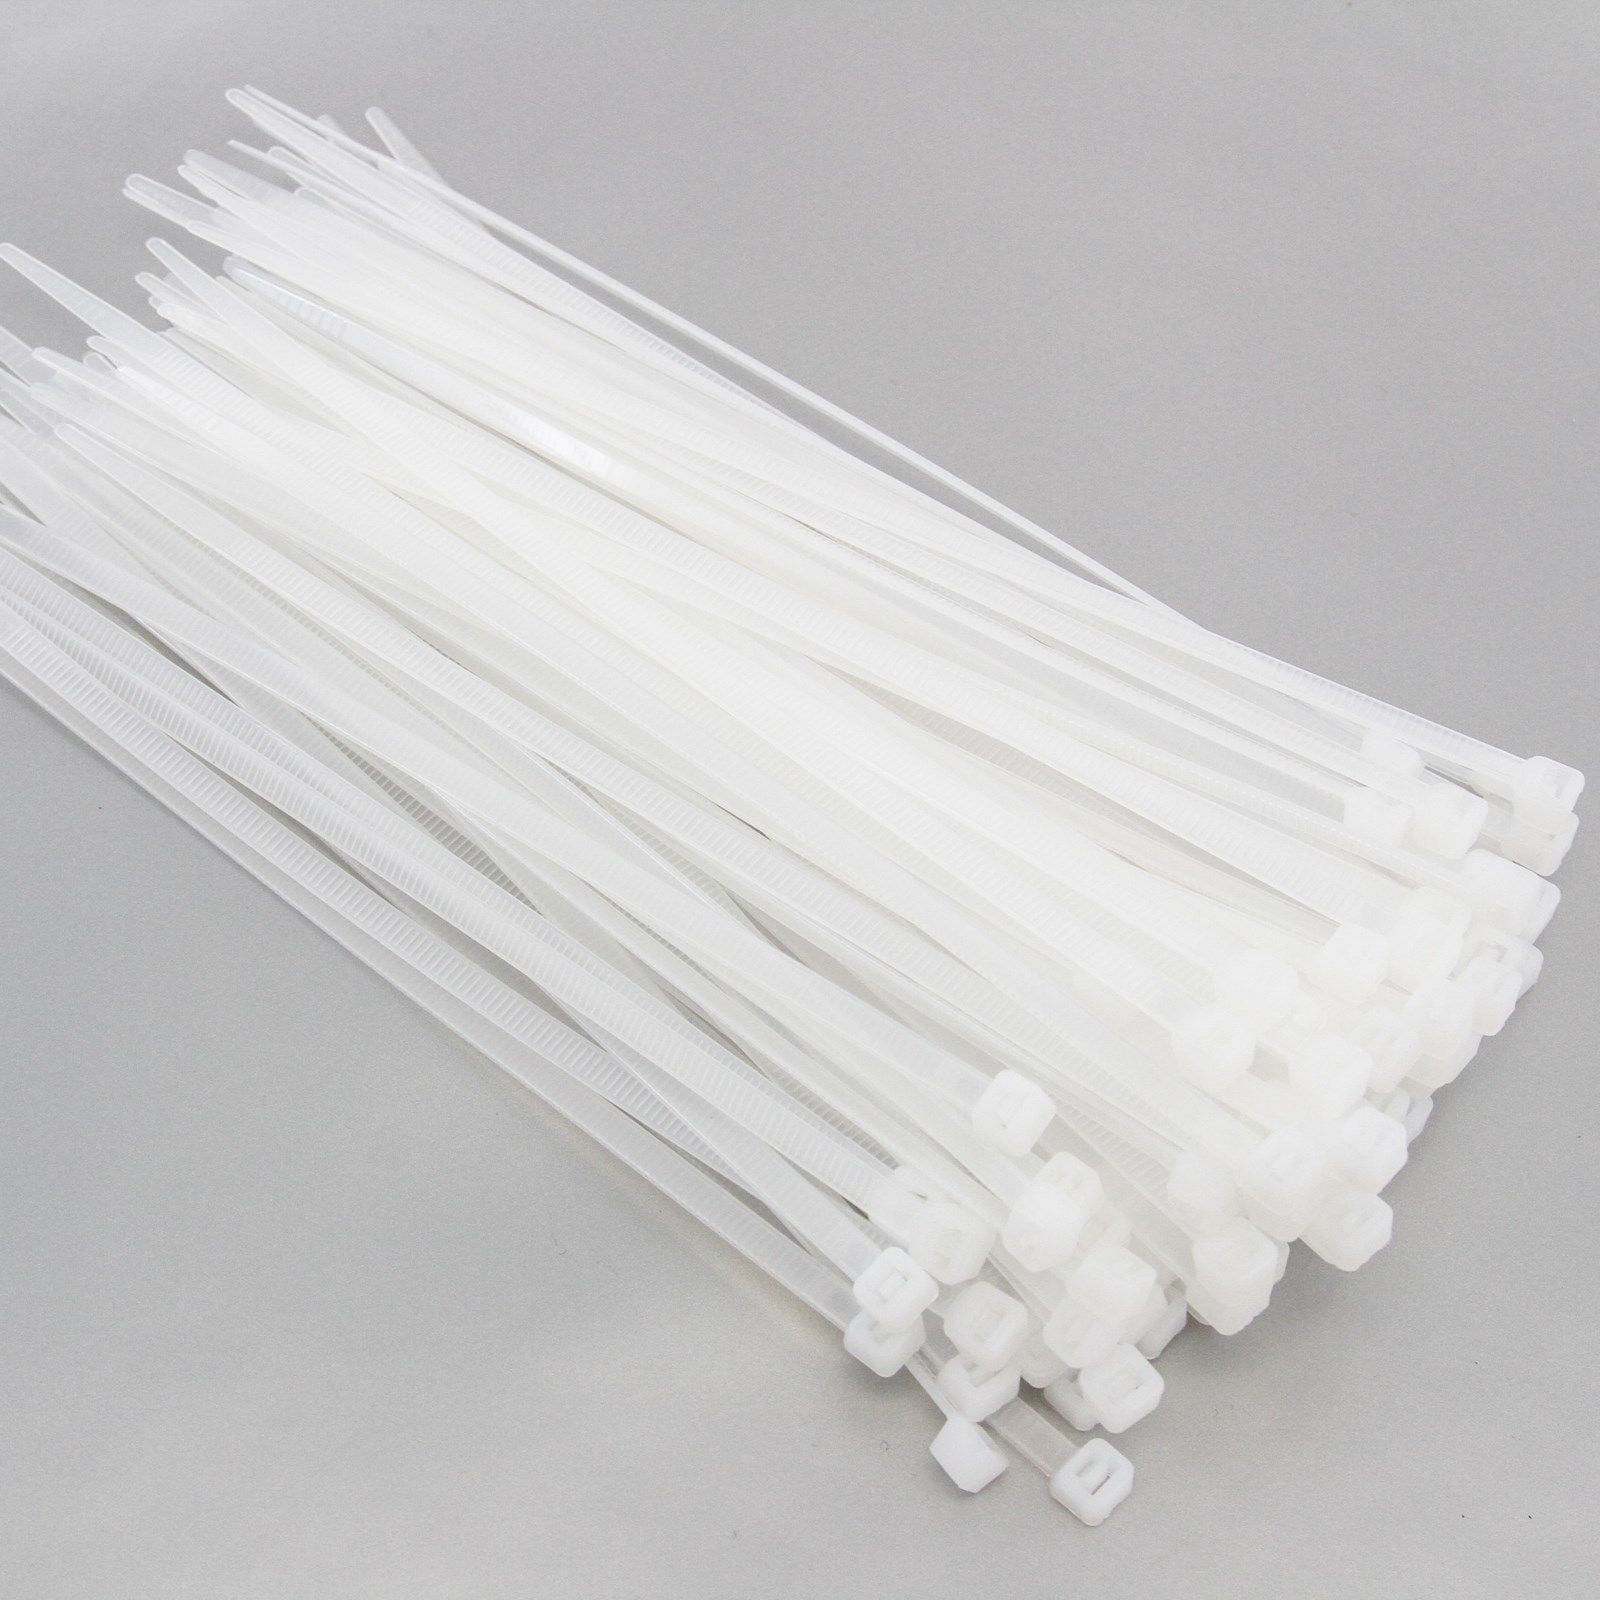 50 Pieces 12" inch White Plastic Nylon CABLE TIES Wire Cord Wrap Network Zip Tie 